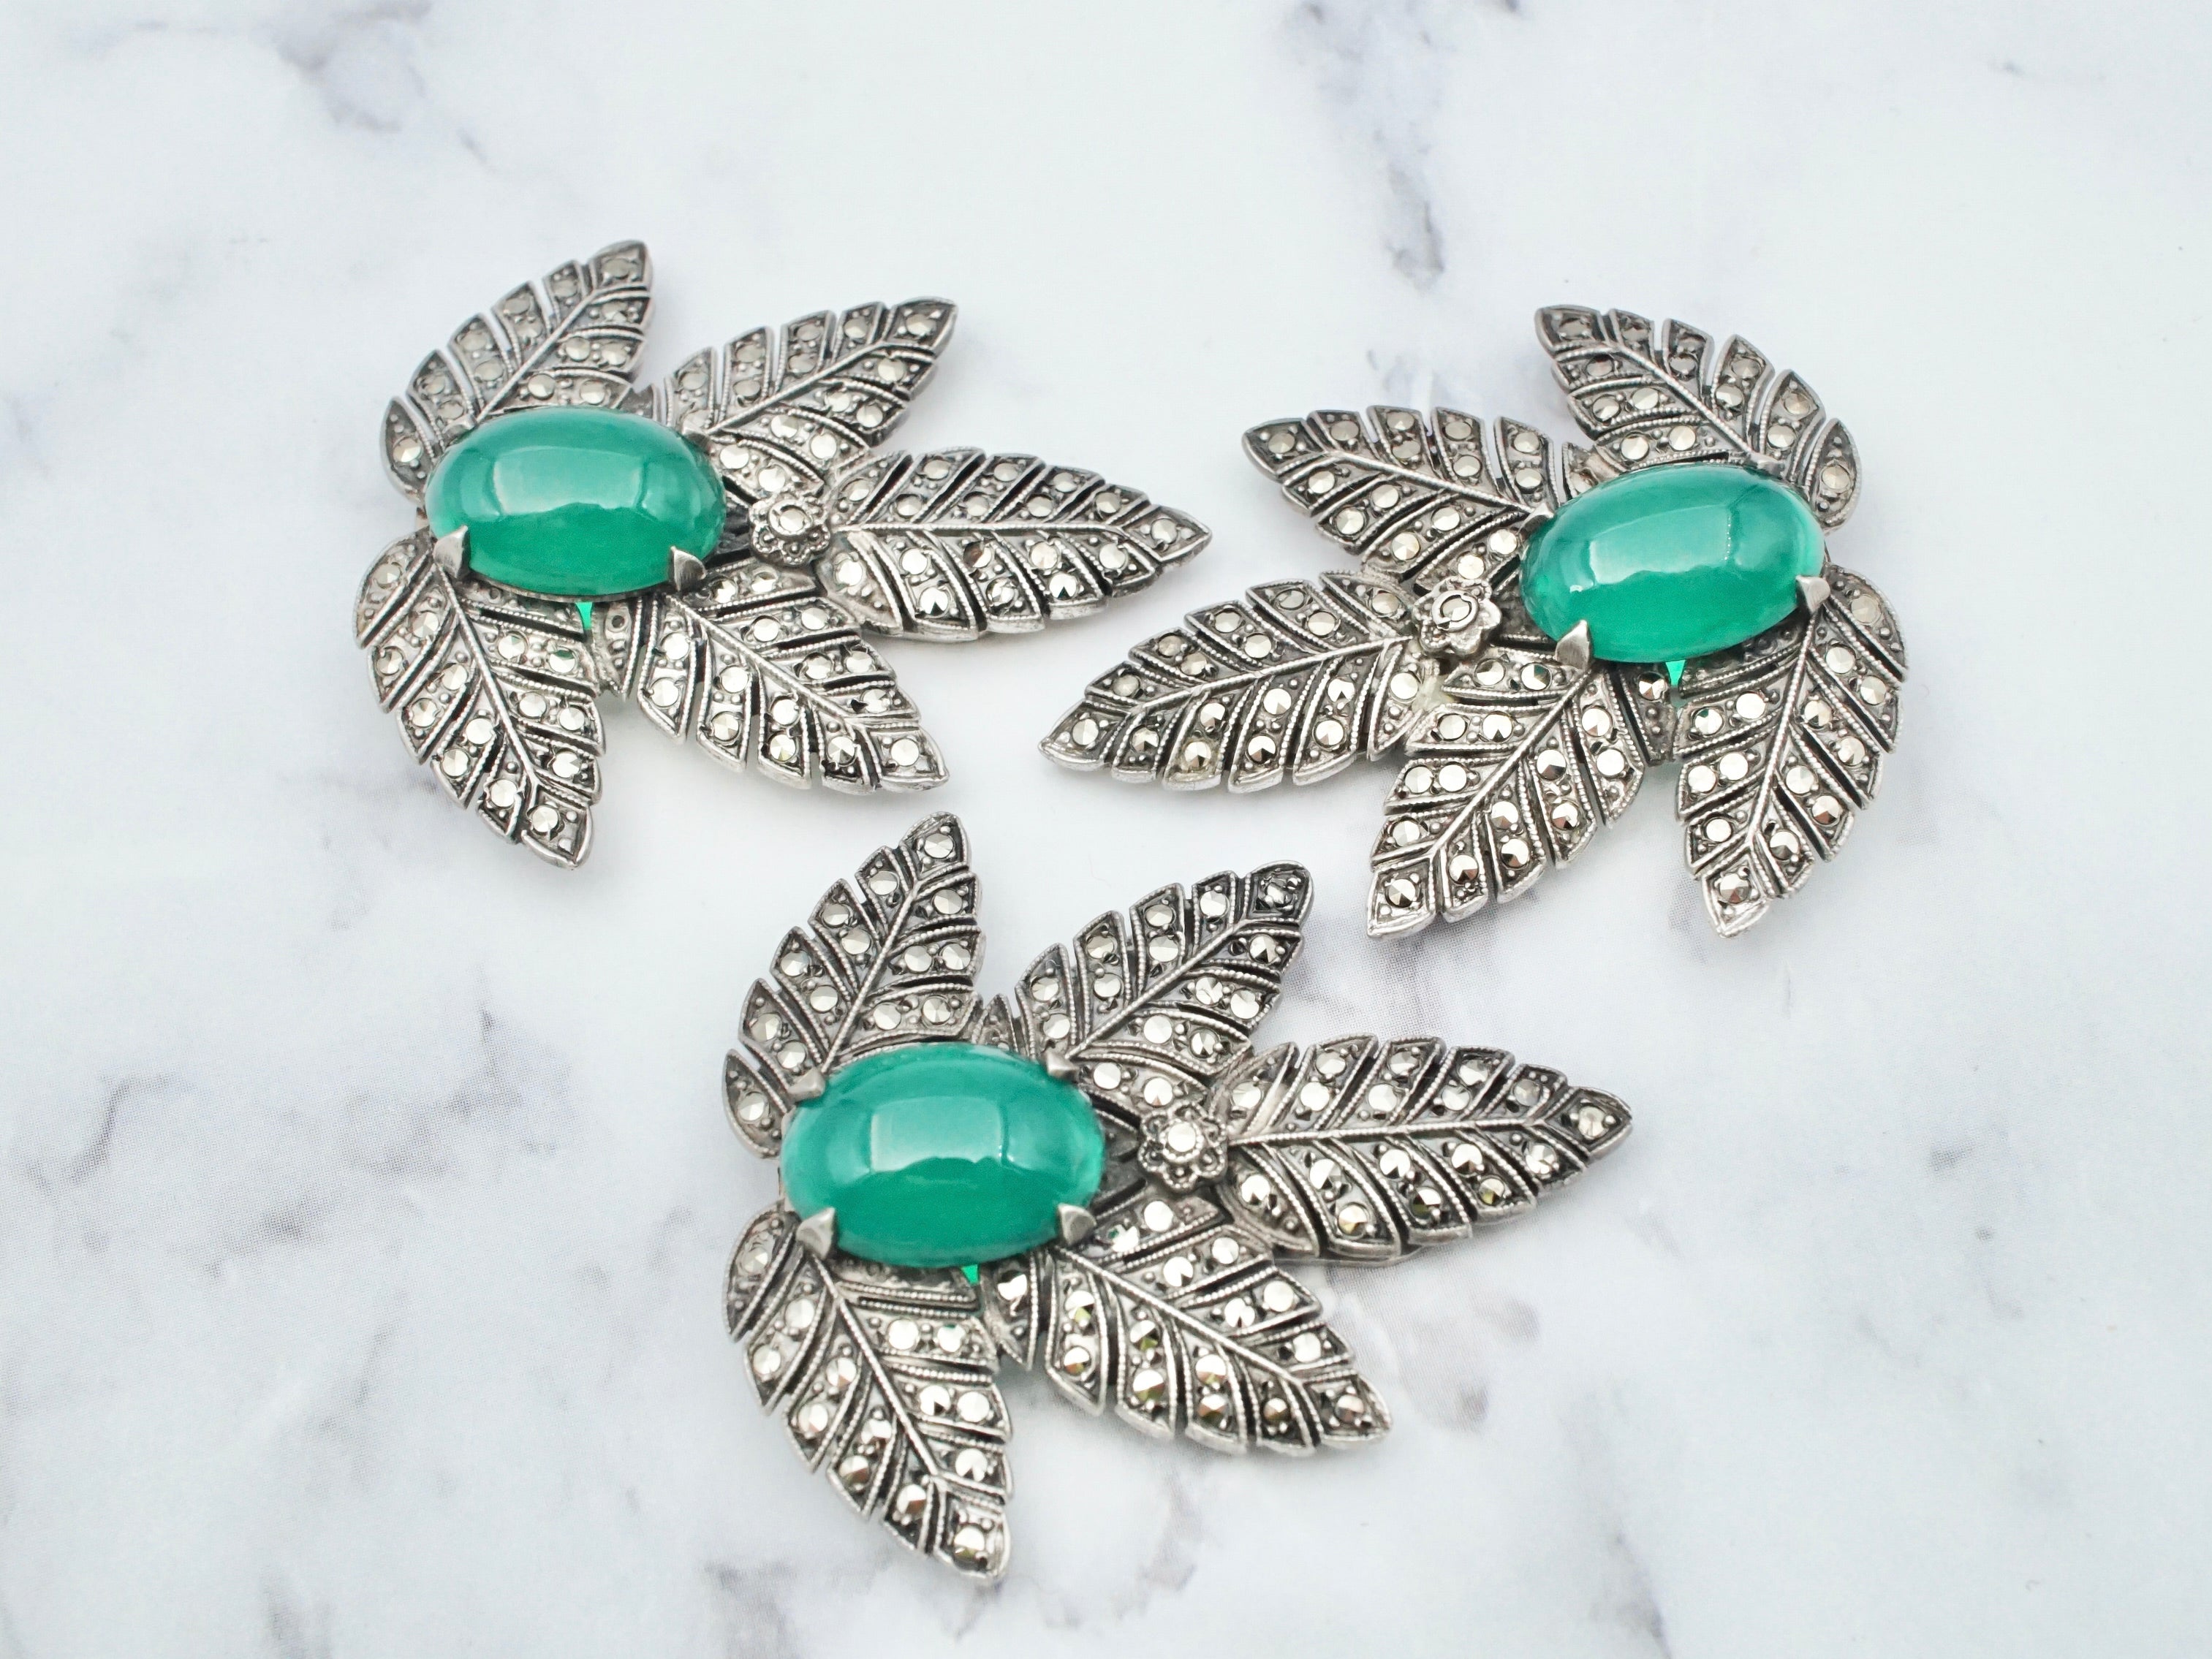 Antique art deco sterling, marcasite, and chrysoprase dress clips